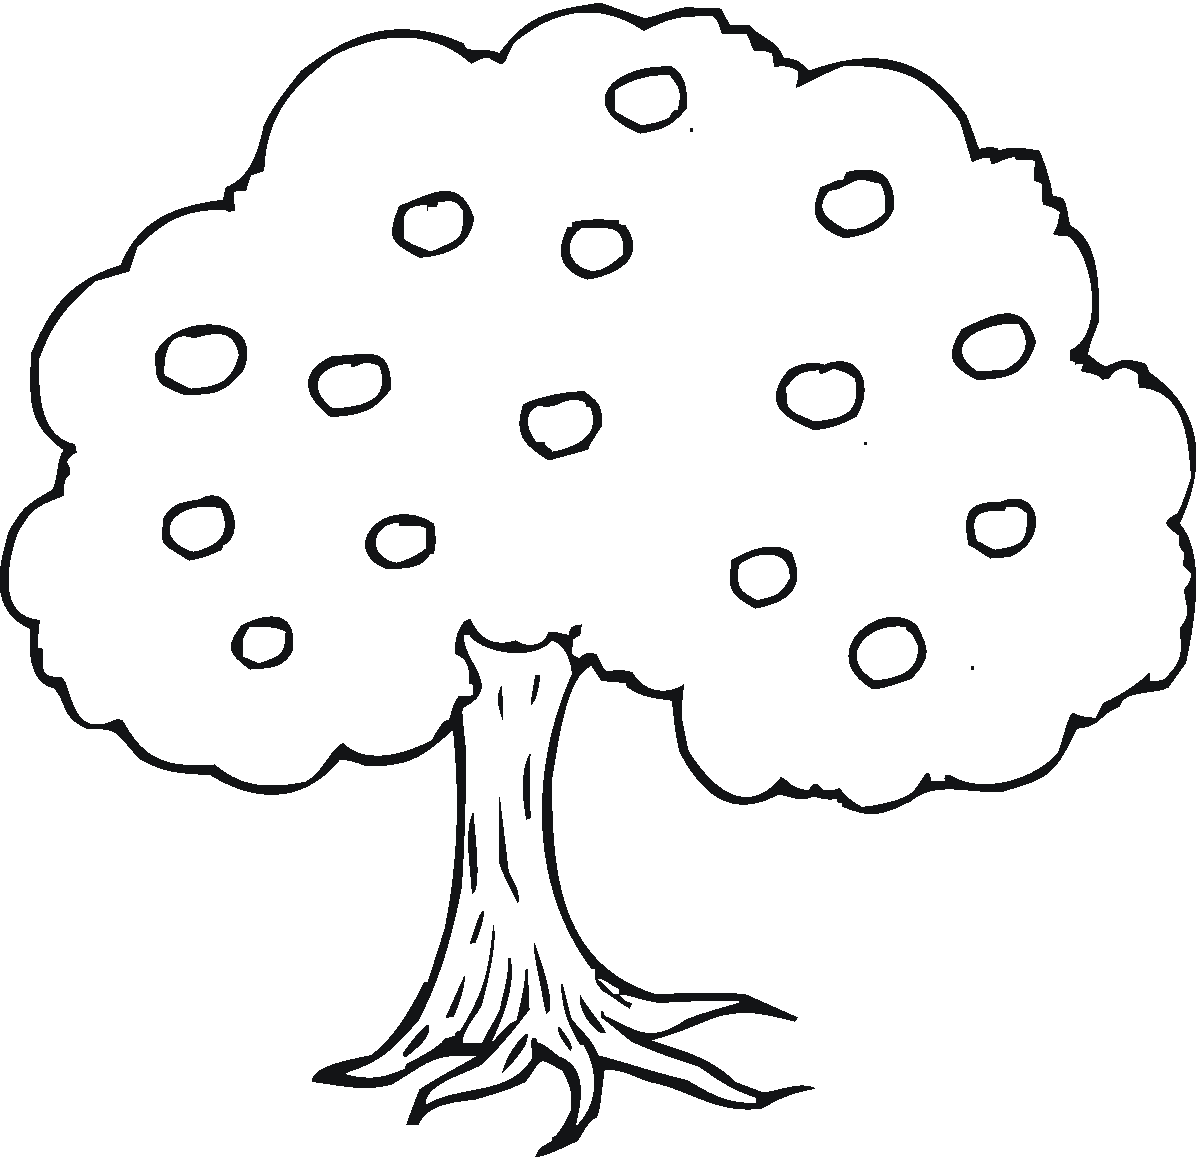 apple tree clipart black and white - photo #16